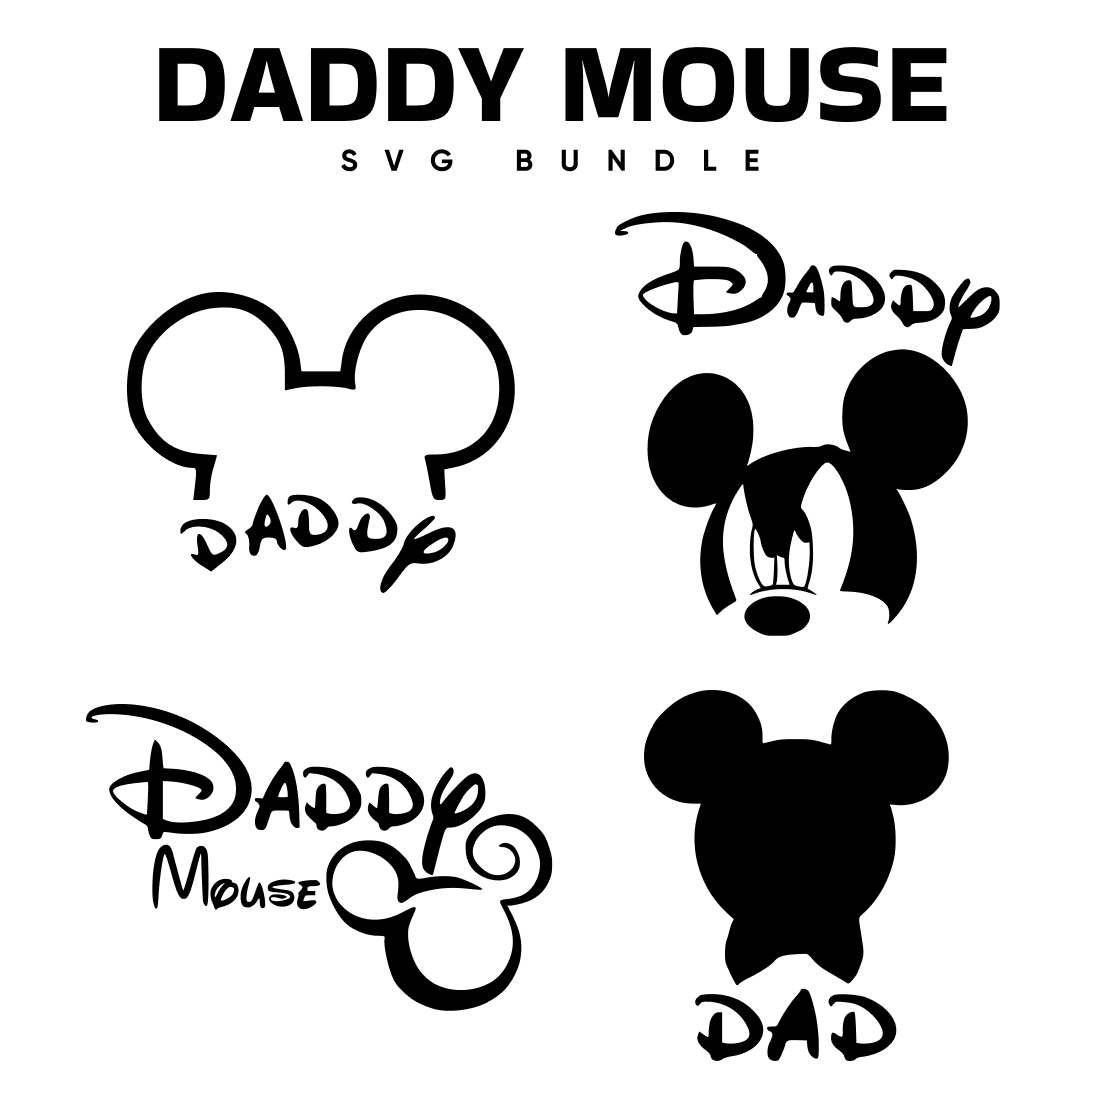 Daddy Mouse SVG.